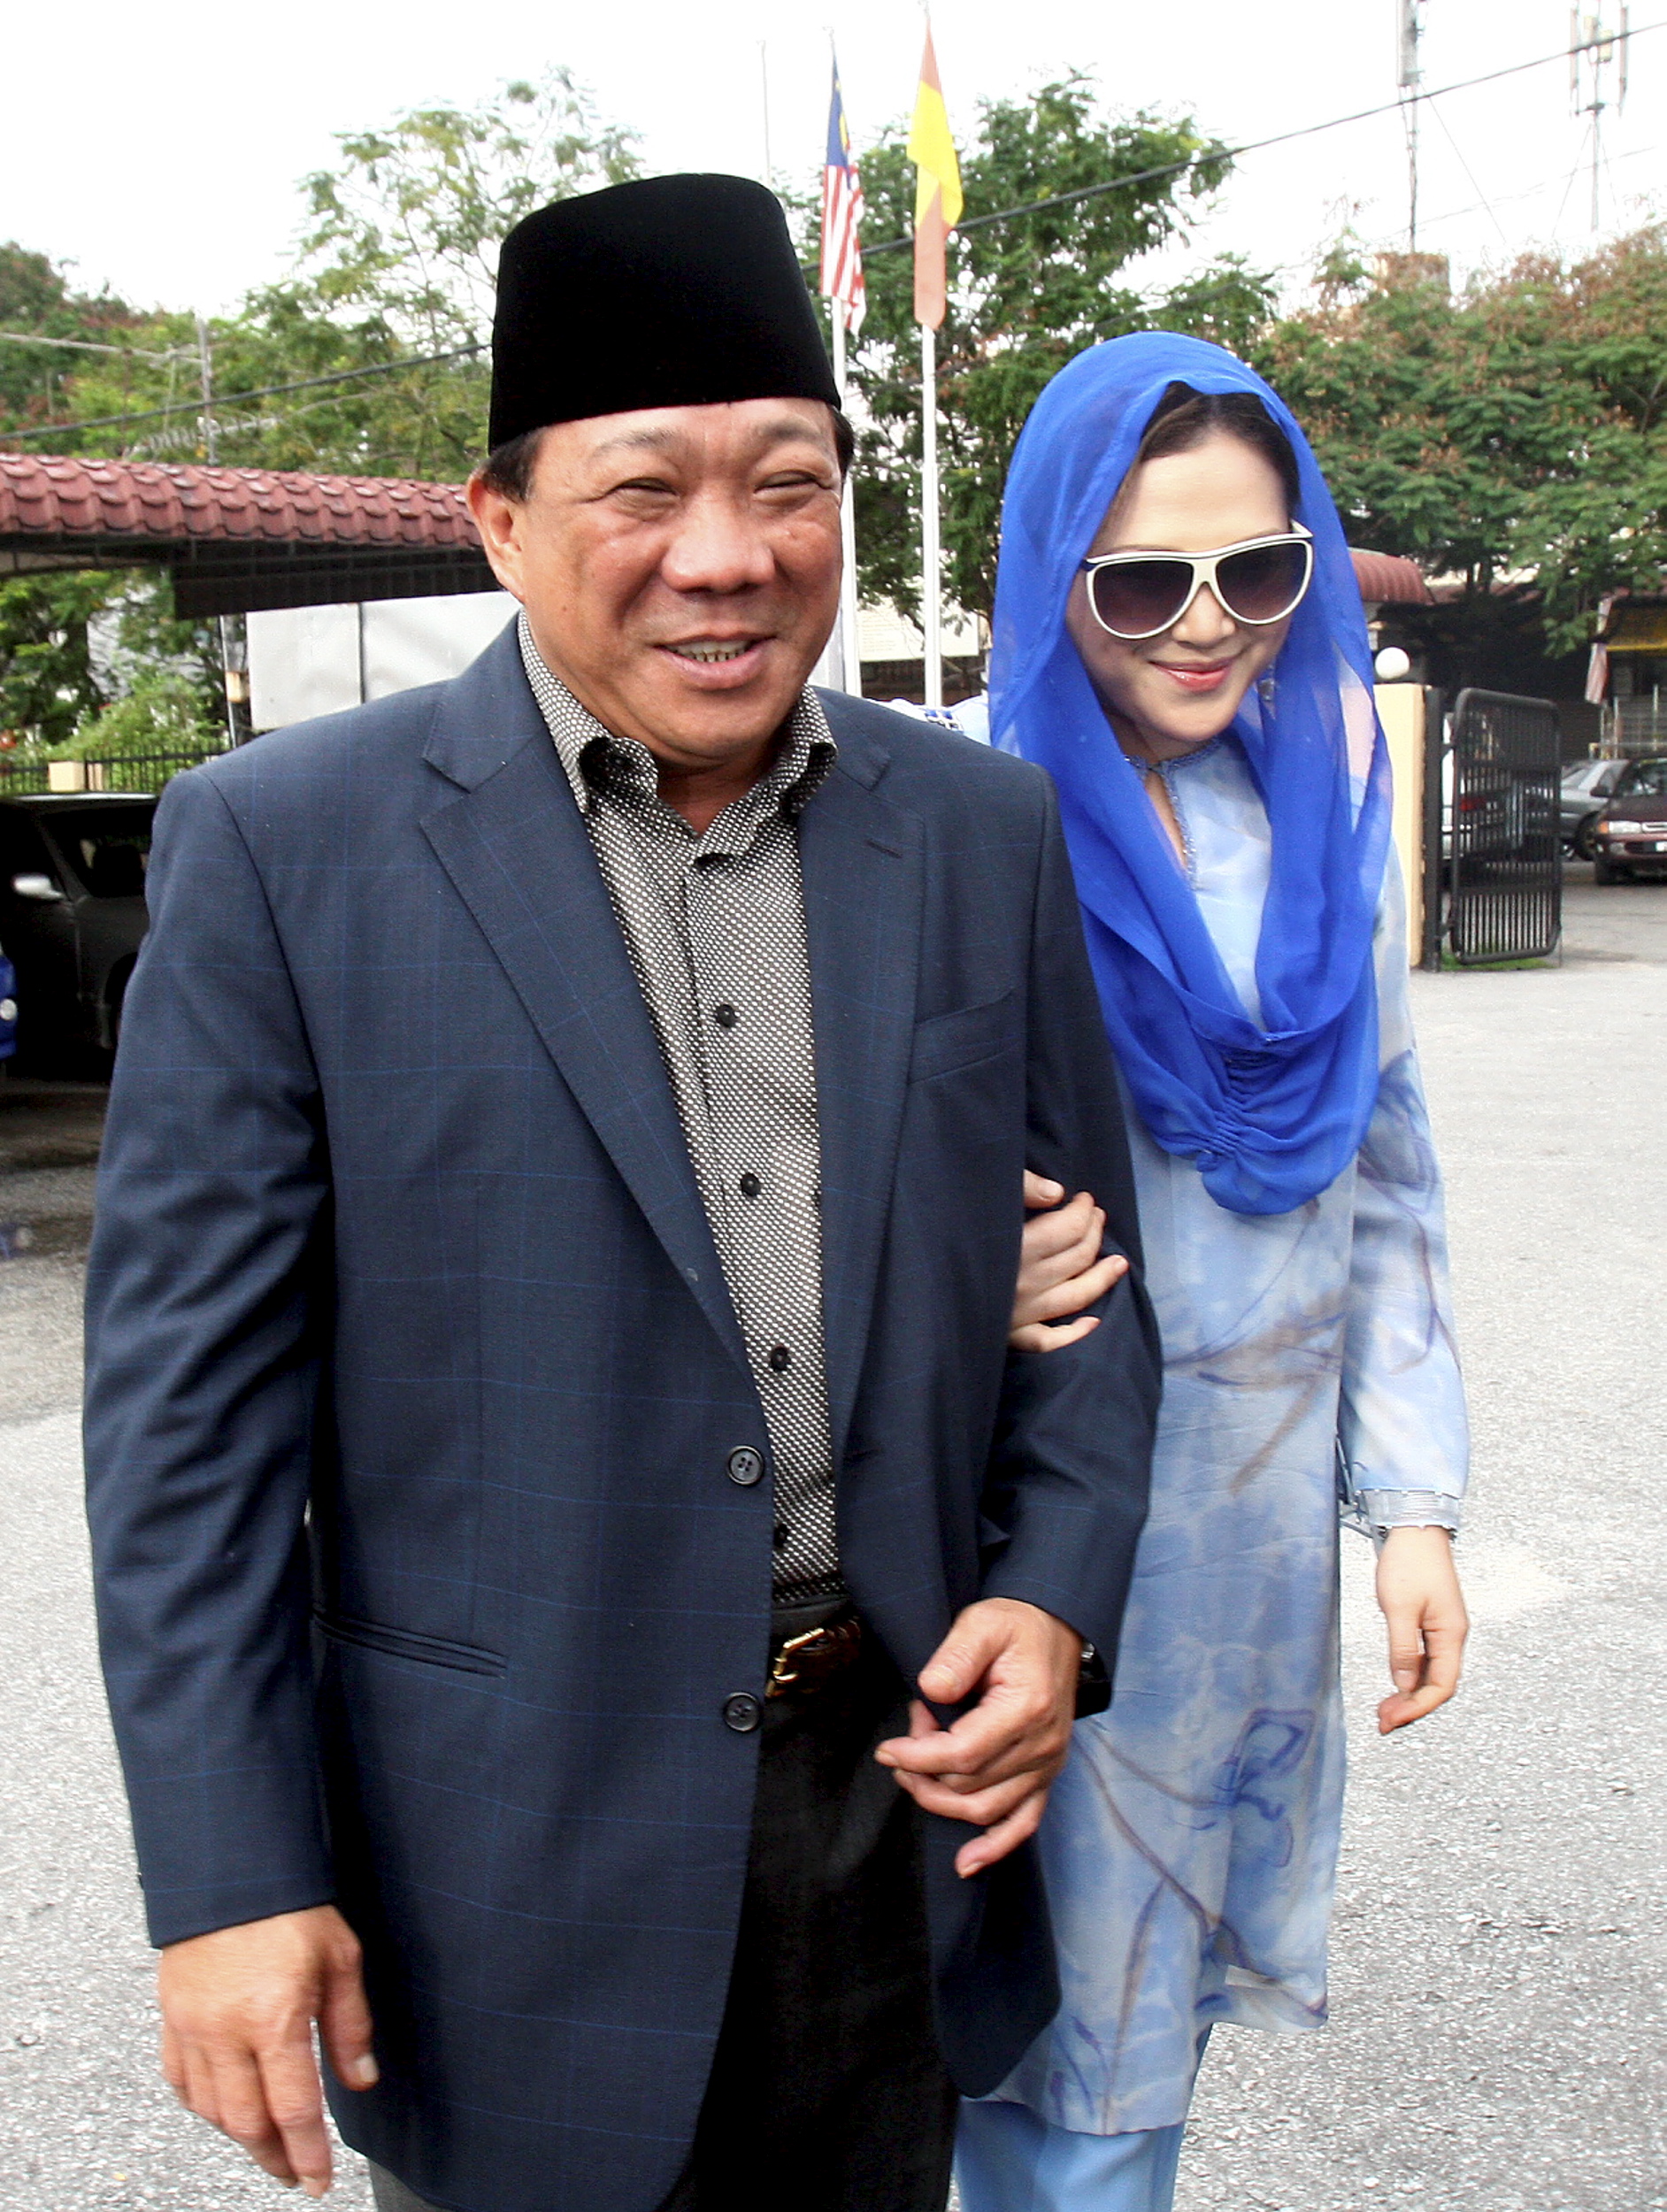 Malaysian lawmaker Bung Mokhtar Radin and his second wife Zizie Ezette arriving at a Shari‘a court in Kuala Lumpur on May 19, 2010 (AFP/Getty Images)